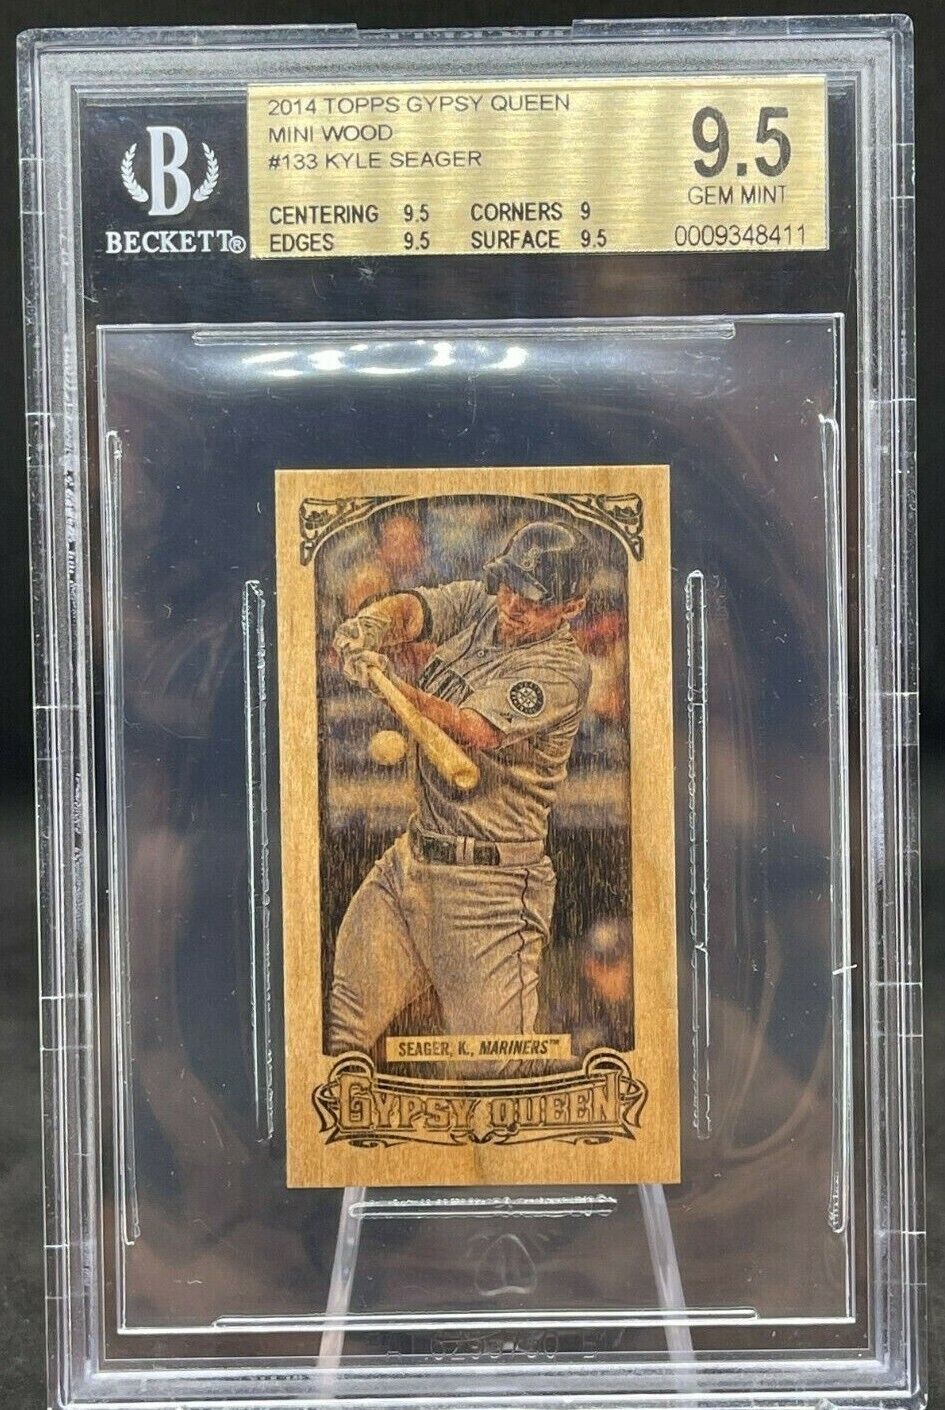 2014 Topps Gypsy Queen Rare Mini Wood Kyle Seager #5/5 Seattle Mariners BGS 9.5